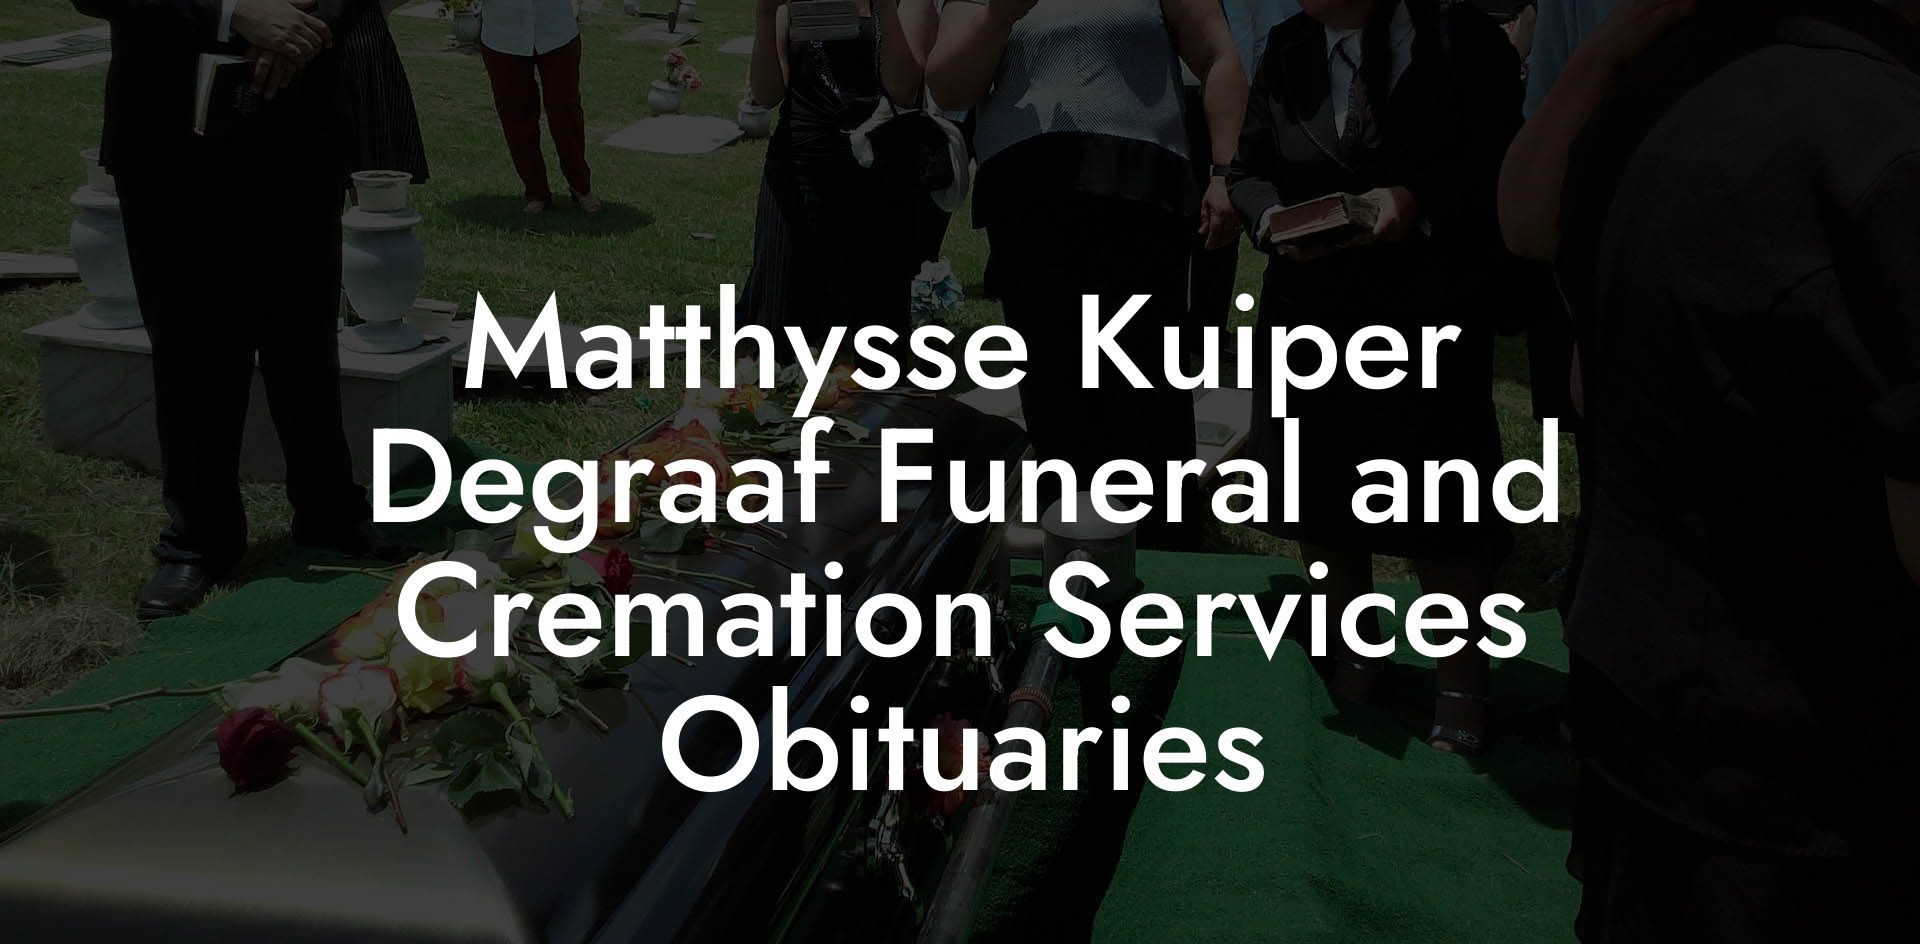 Matthysse Kuiper Degraaf Funeral and Cremation Services Obituaries